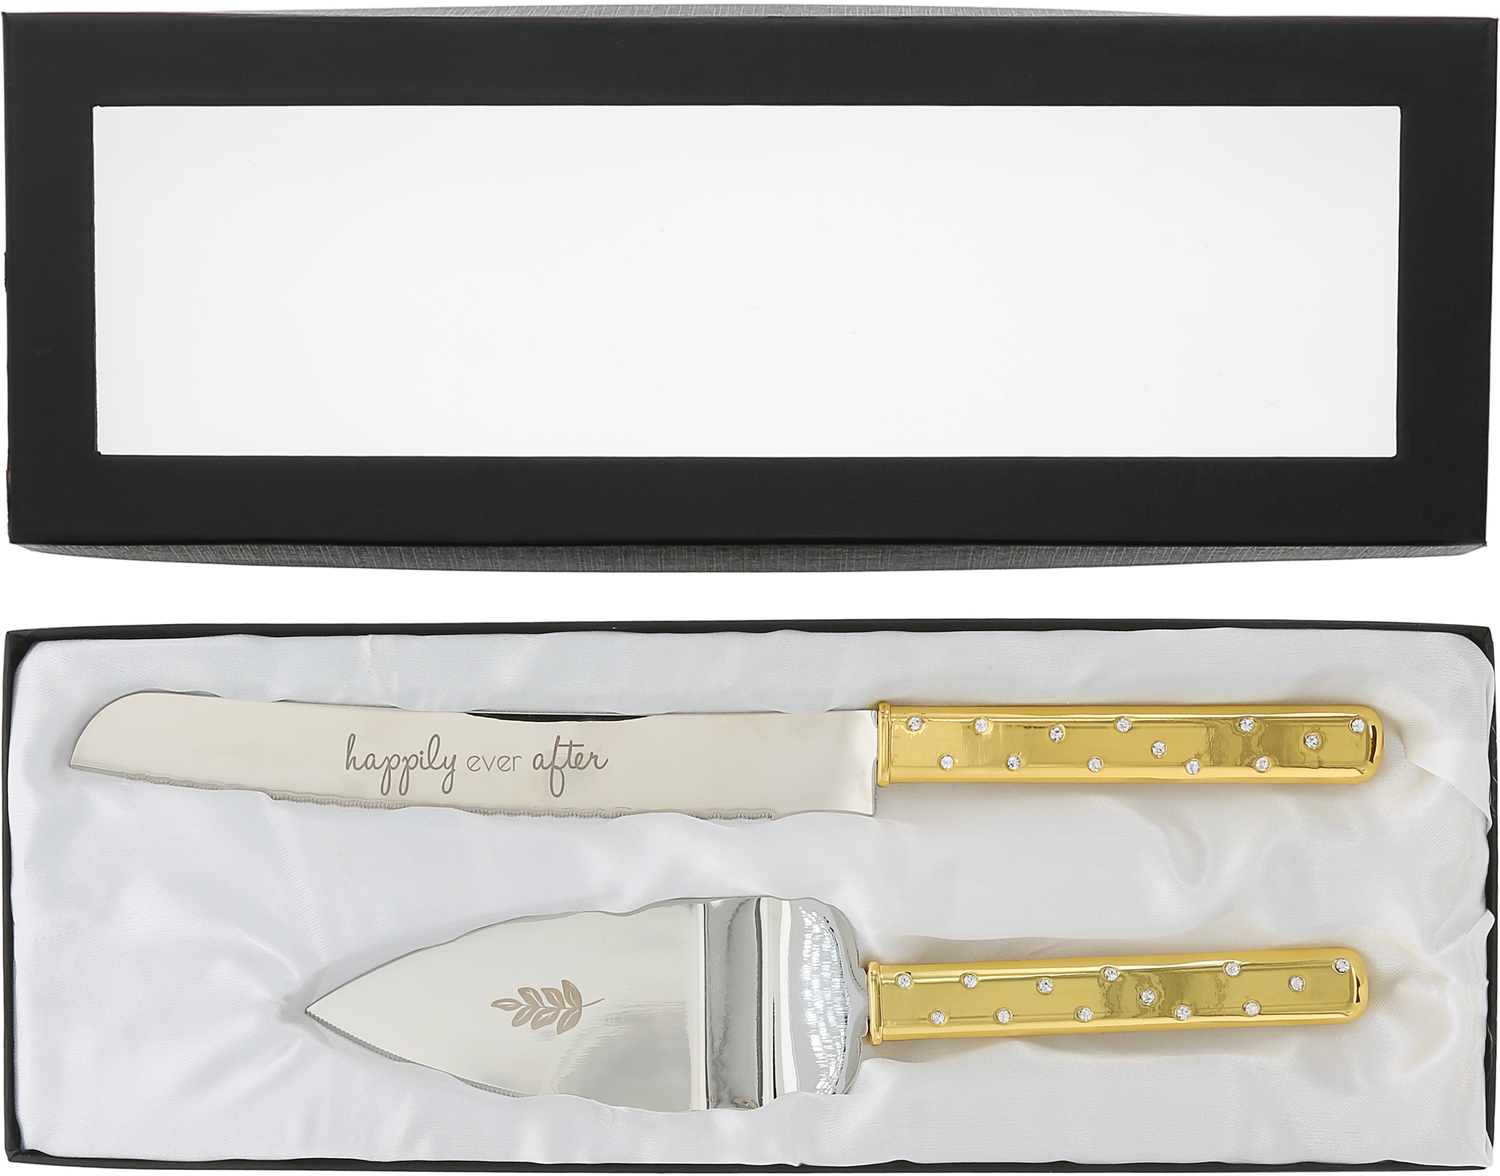 Happily Ever After by Love Grows - Happily Ever After - Cake Knife and Server Set